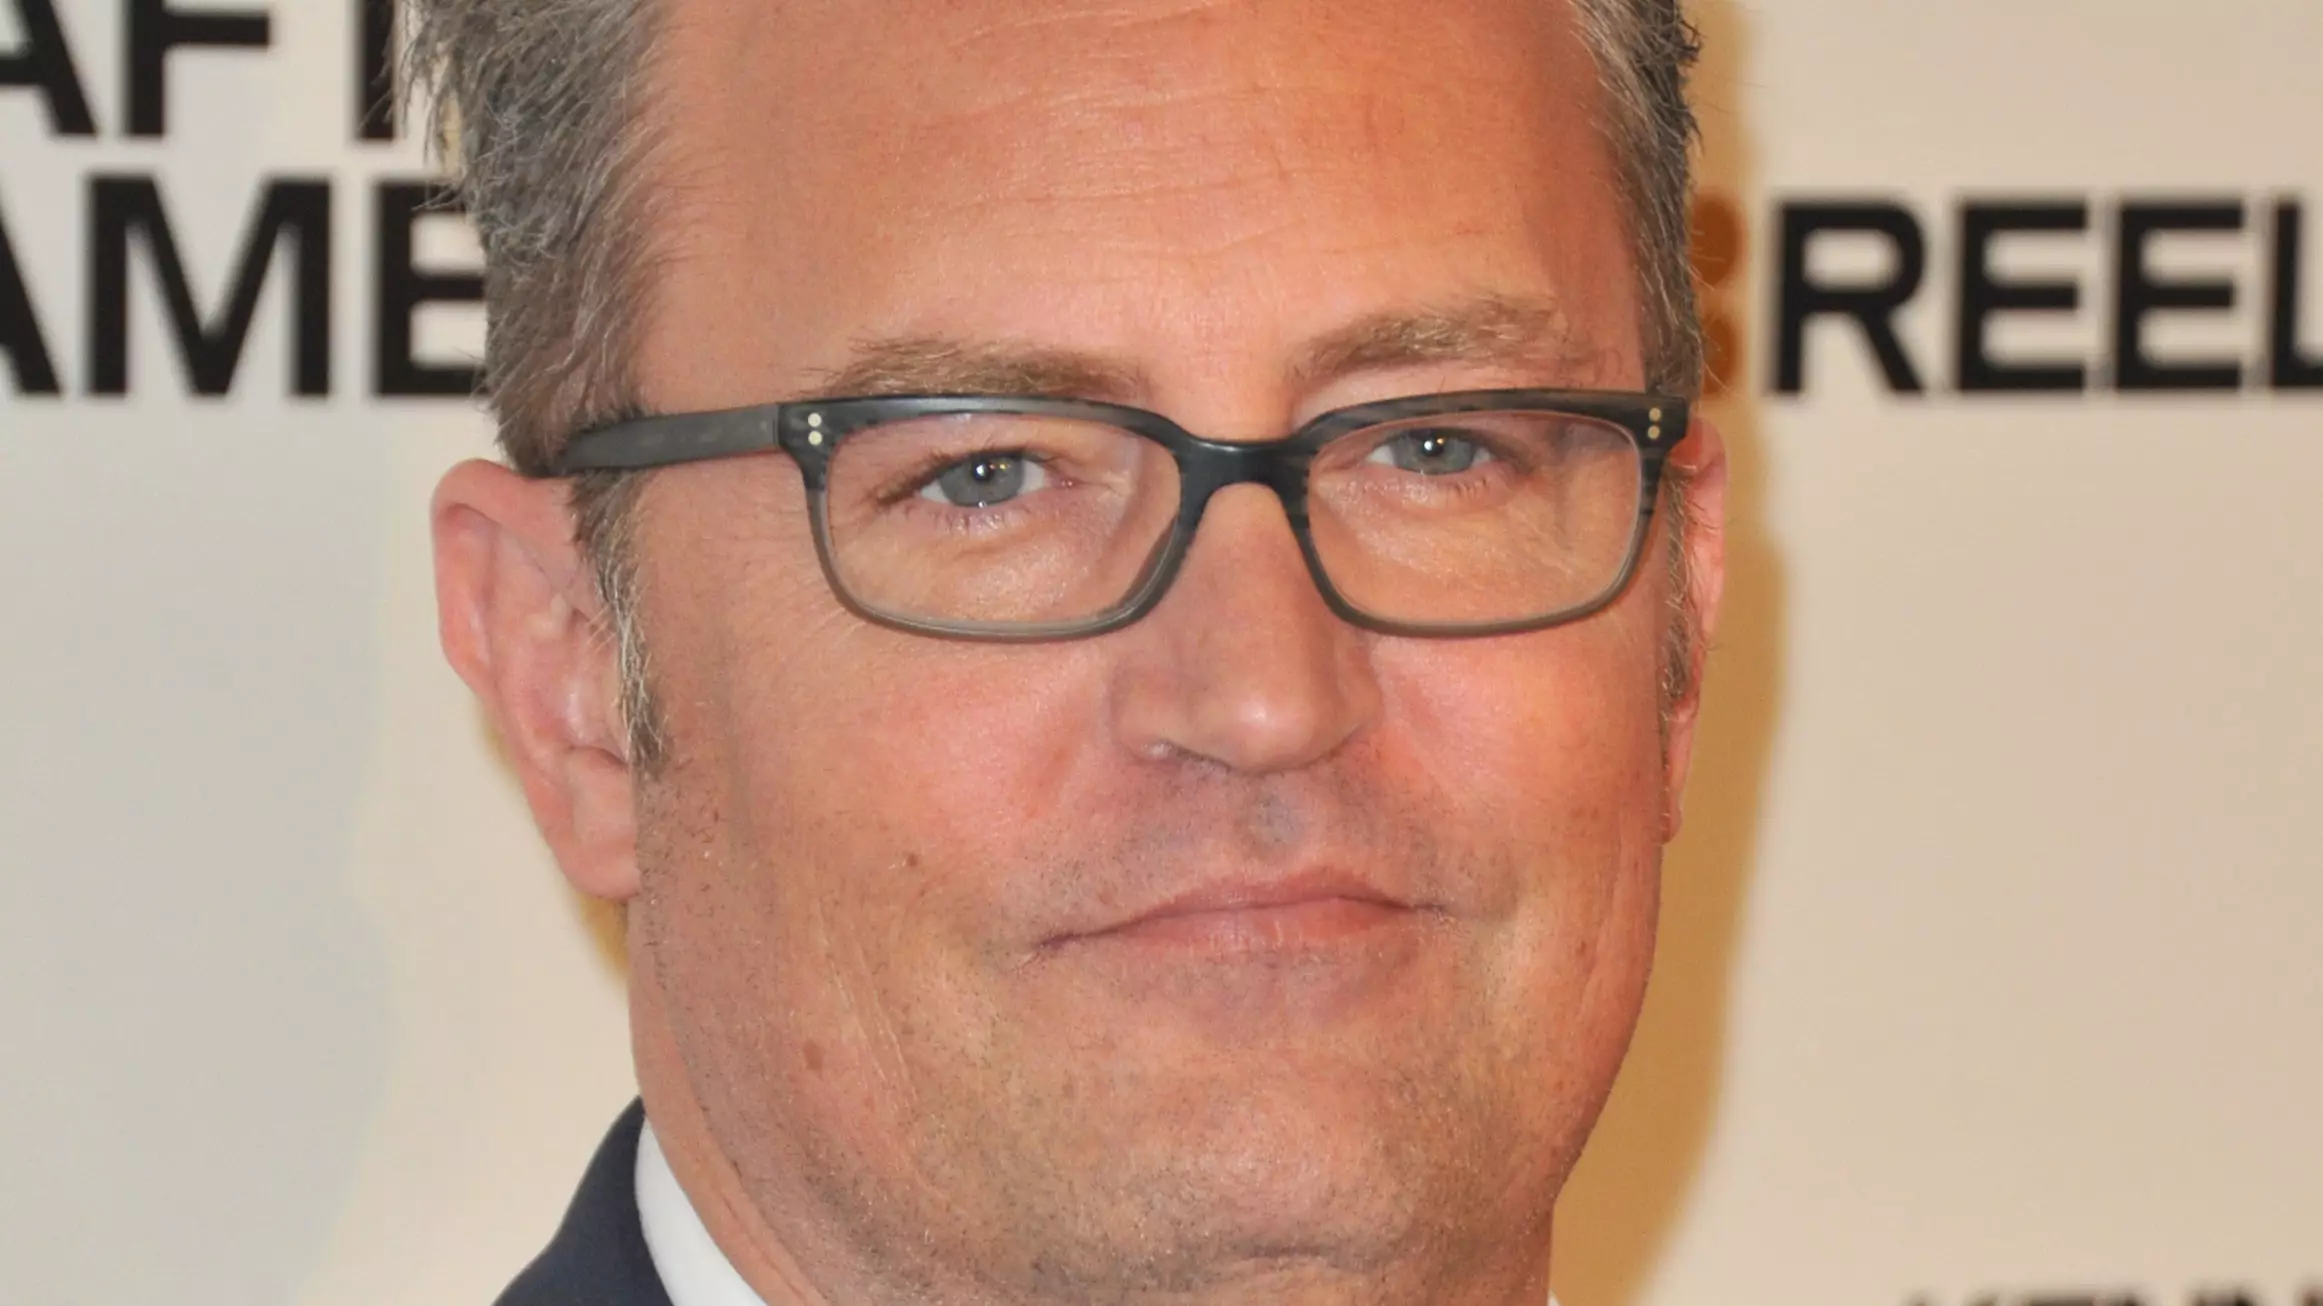 Matthew Perry Gets Engaged To Girlfriend Molly Hurwitz